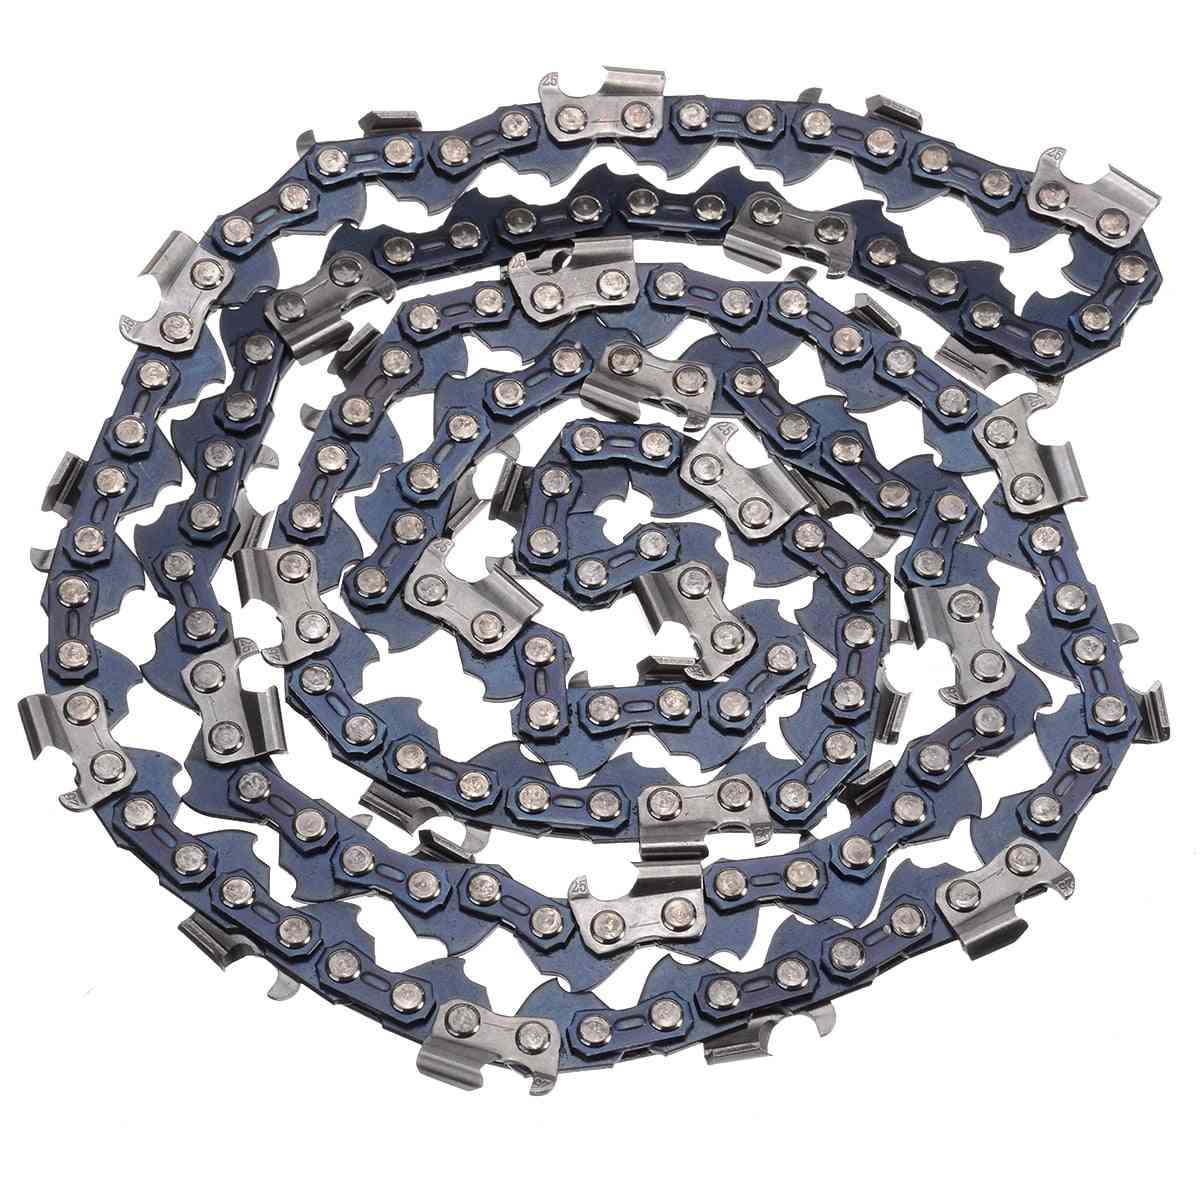 20 Inch Chainsaw Chain, Bar Pitch Blade Wood Cutting 76 Drive Links Replacement Parts